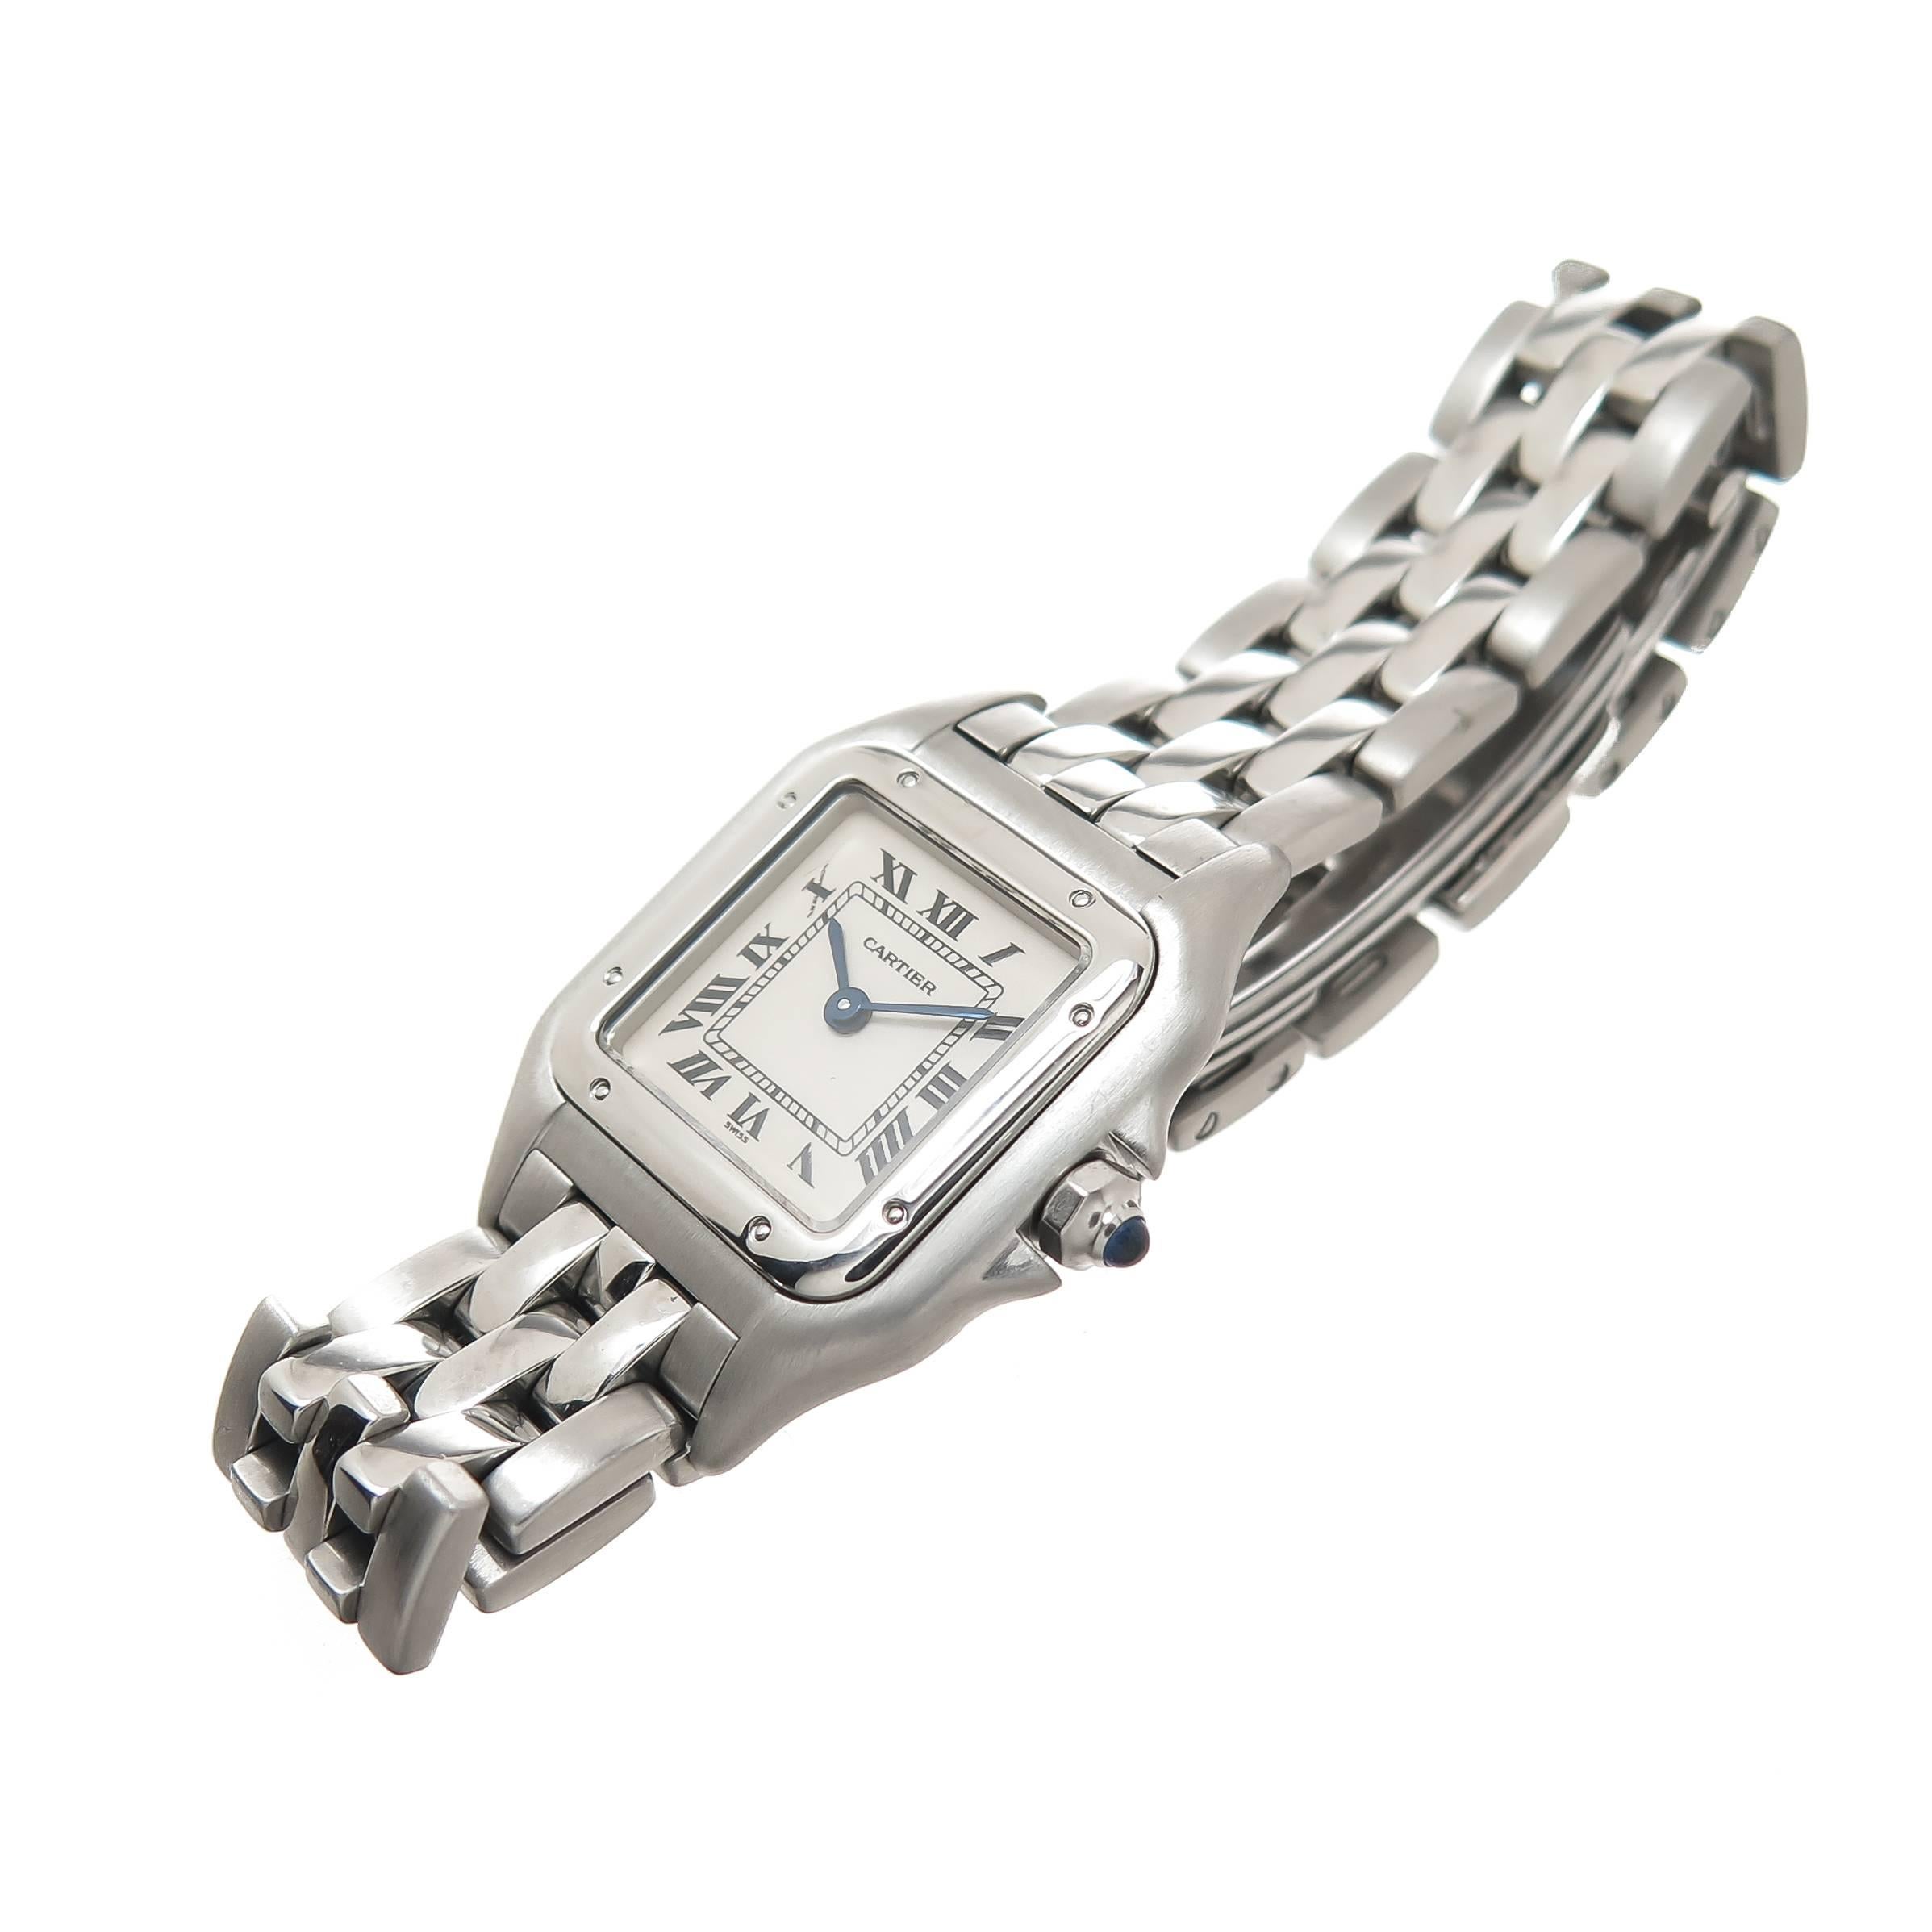 Circa 2005 Cartier Classic Panther Ladies Wrist watch, 29 X 21 MM Stainless Steel case, Quartz Movement, White Dial with Black Roman Numerals, scratch resistant crystal and a sapphire Crown. 1/2 inch wide Stainless Steel Panther Link Bracelet with